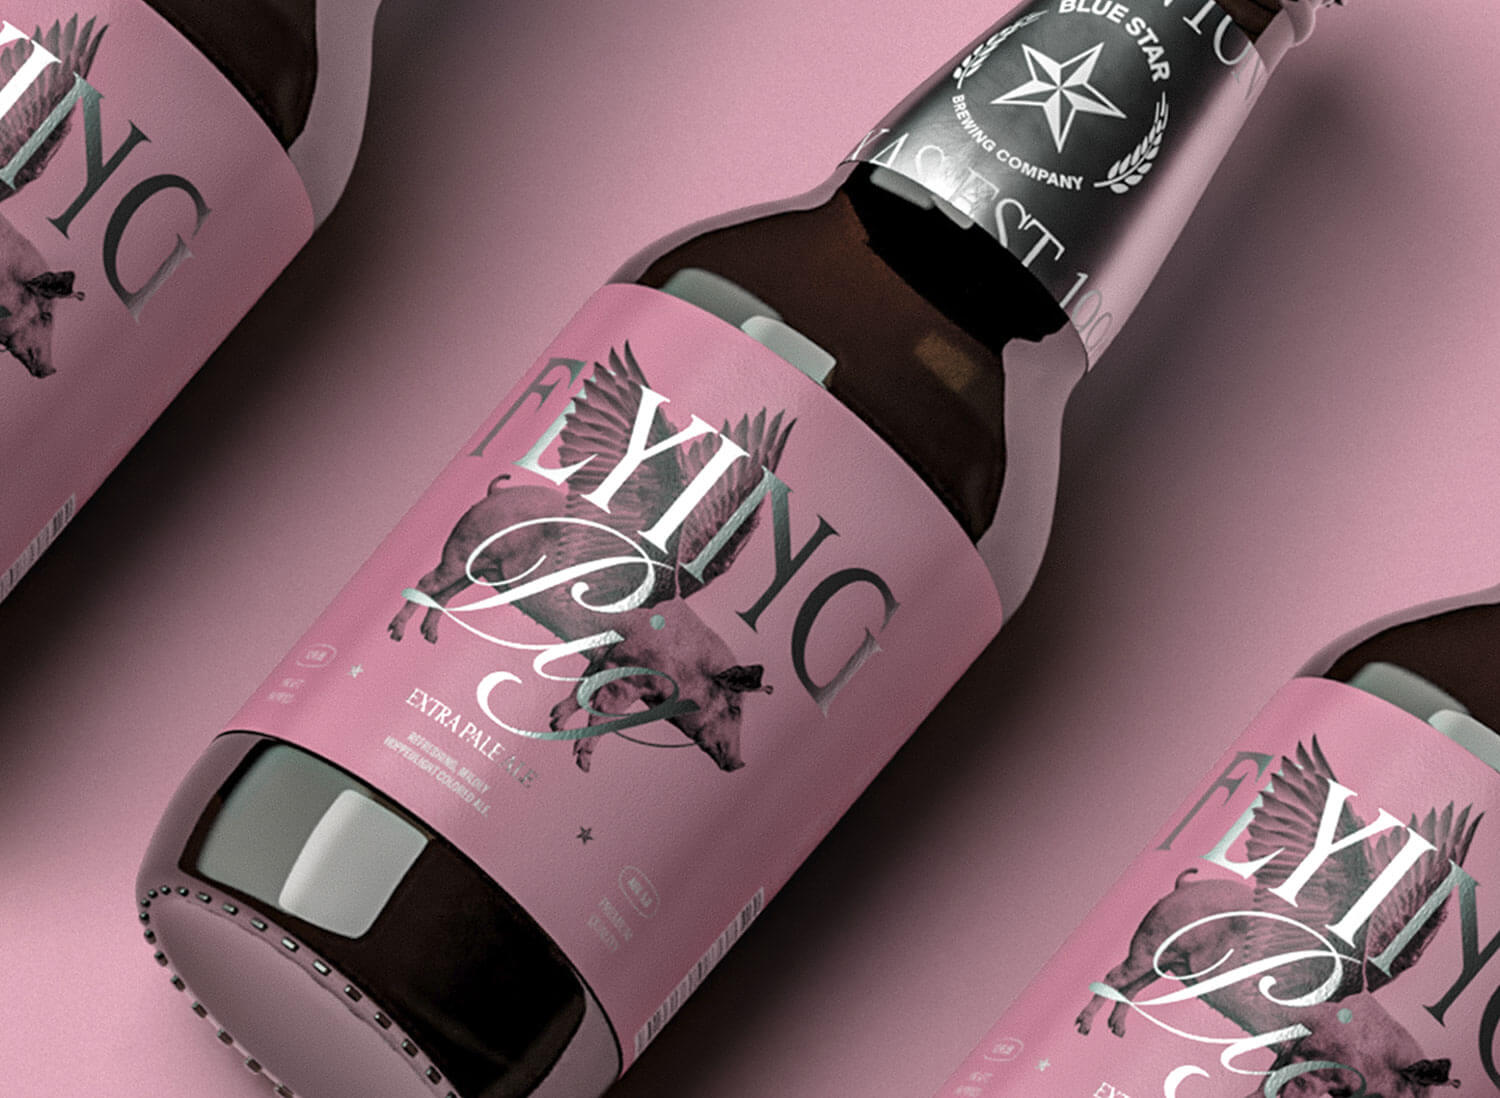 blue star project flying pig beer editorial product packaging